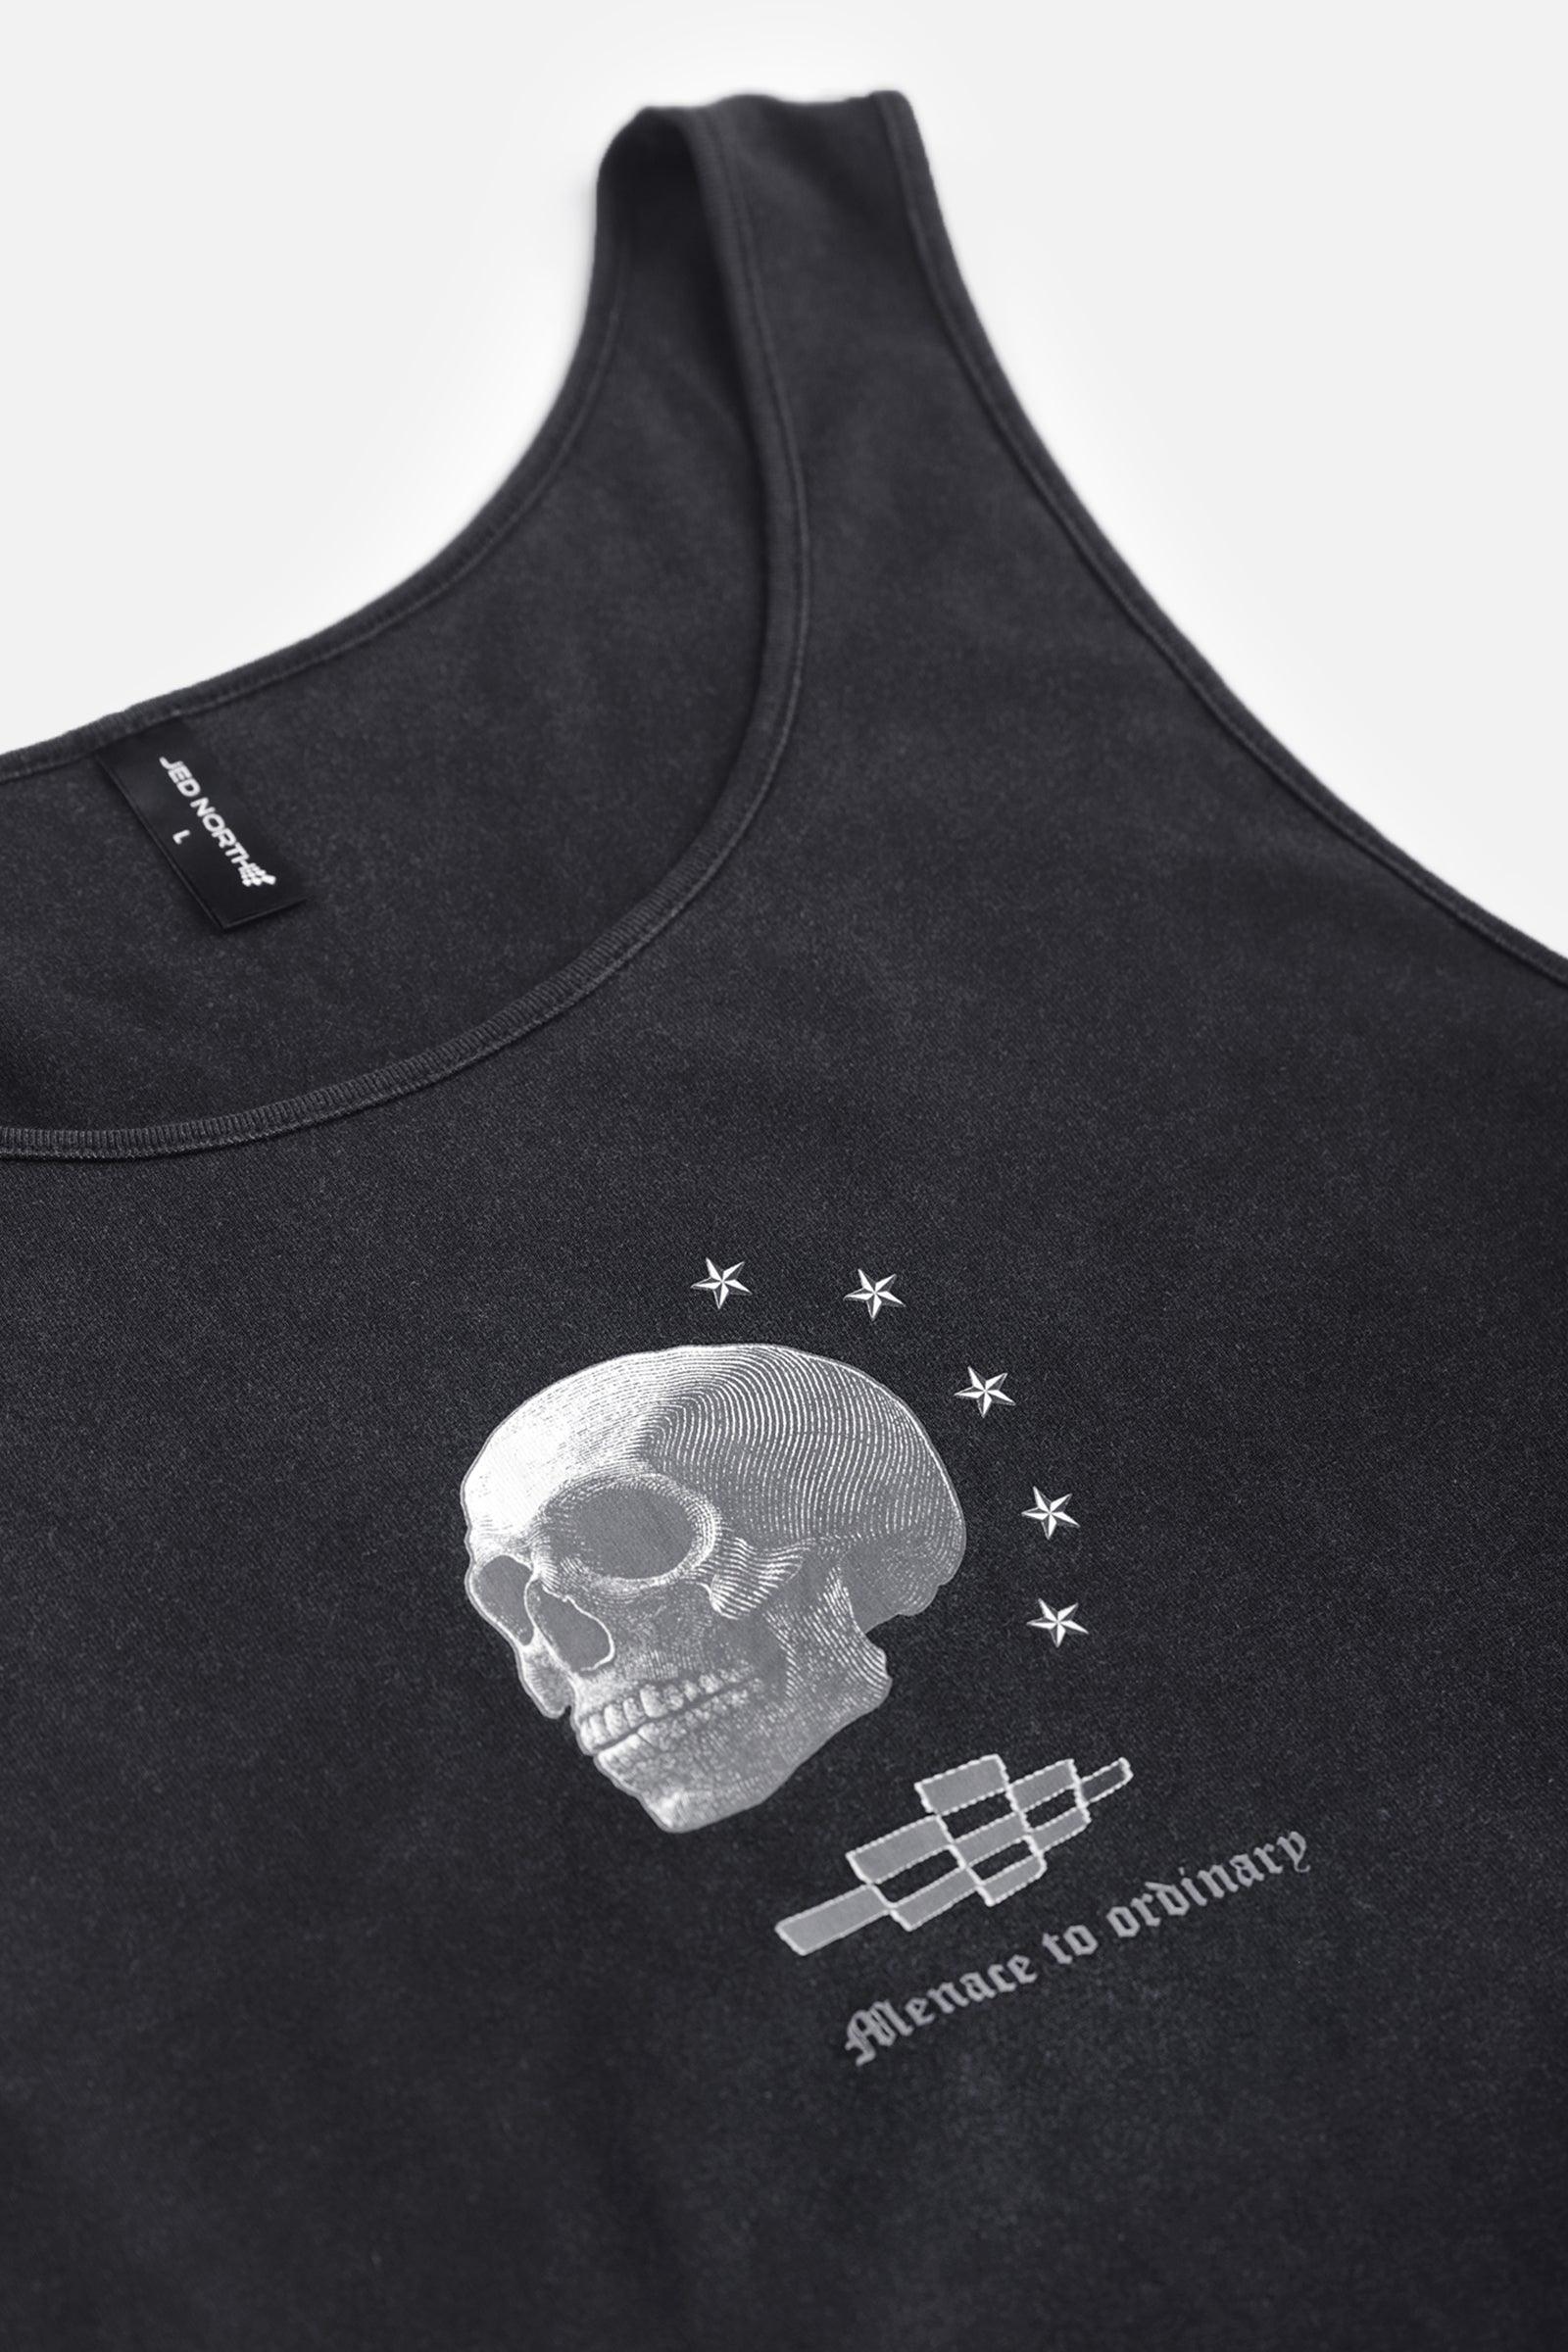 Heavy Duty Workout Tank Top - Washed Black Skull - Jed North